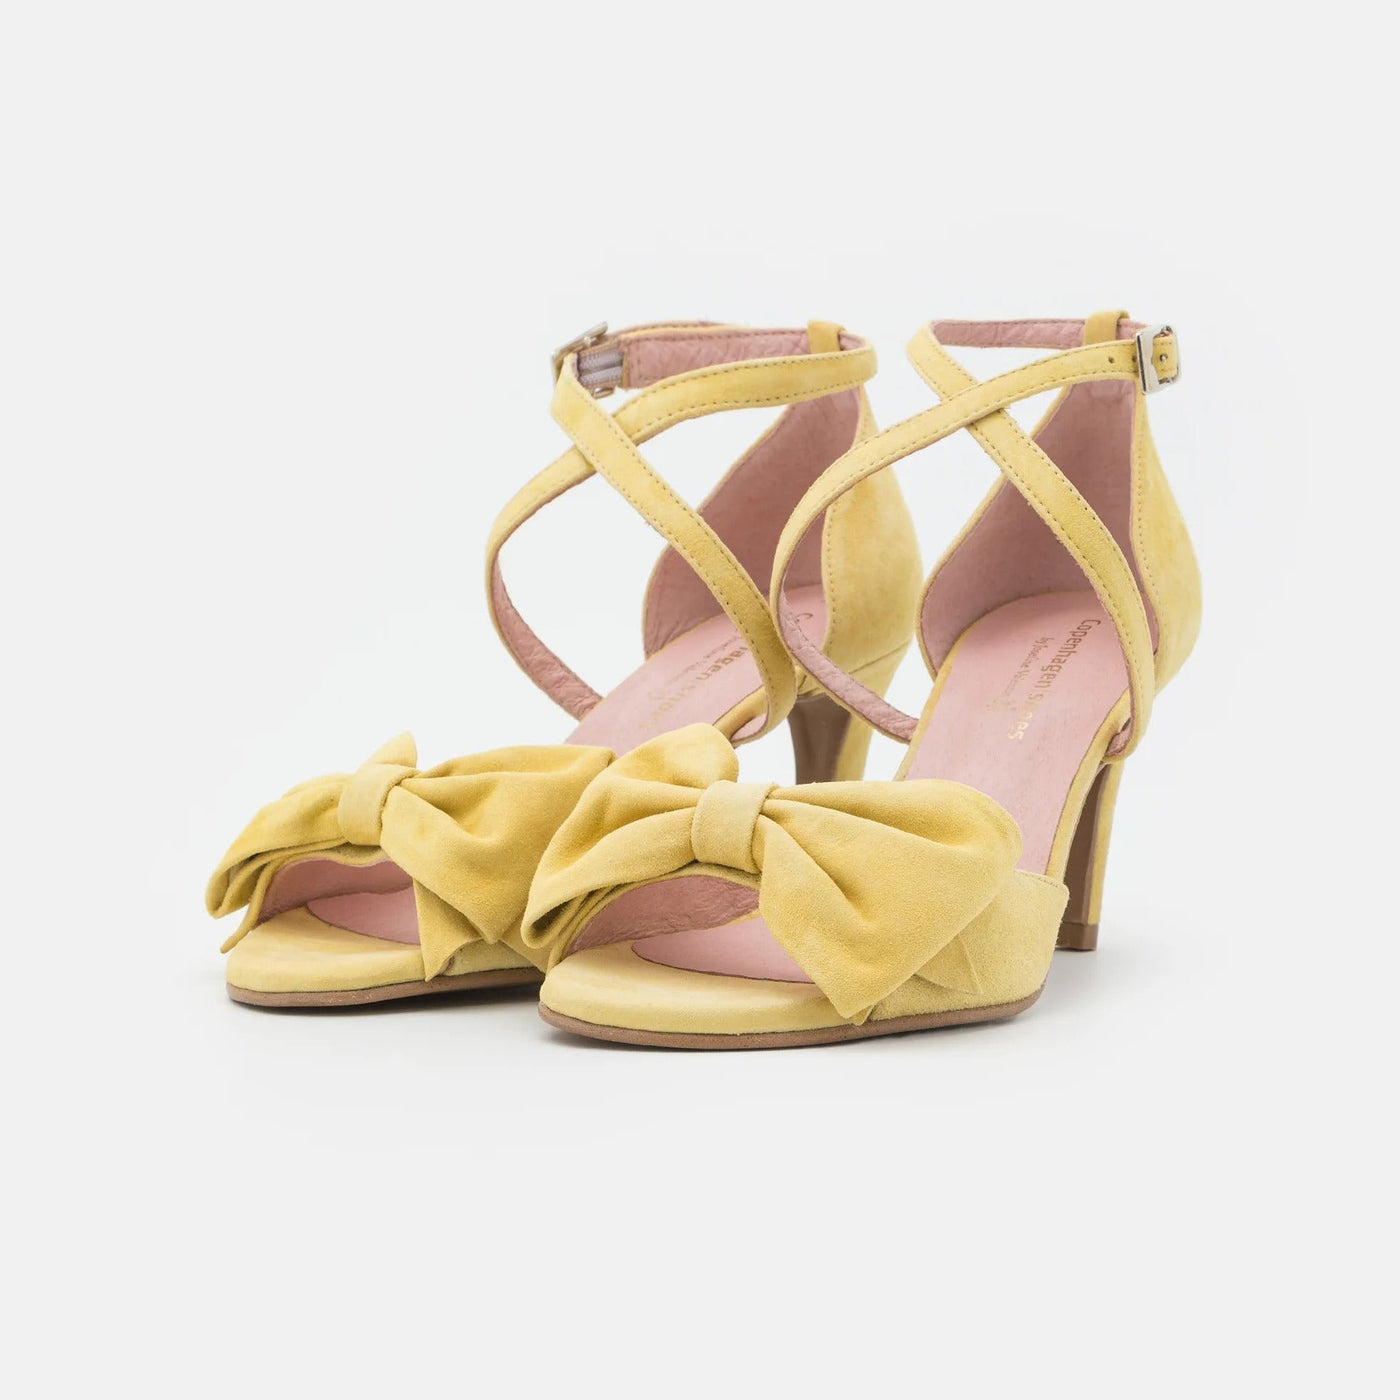 Gotstyle Fashion - Copenhagen Shoes Shoes Suede Stilletto Sandal with Bow  - Yellow